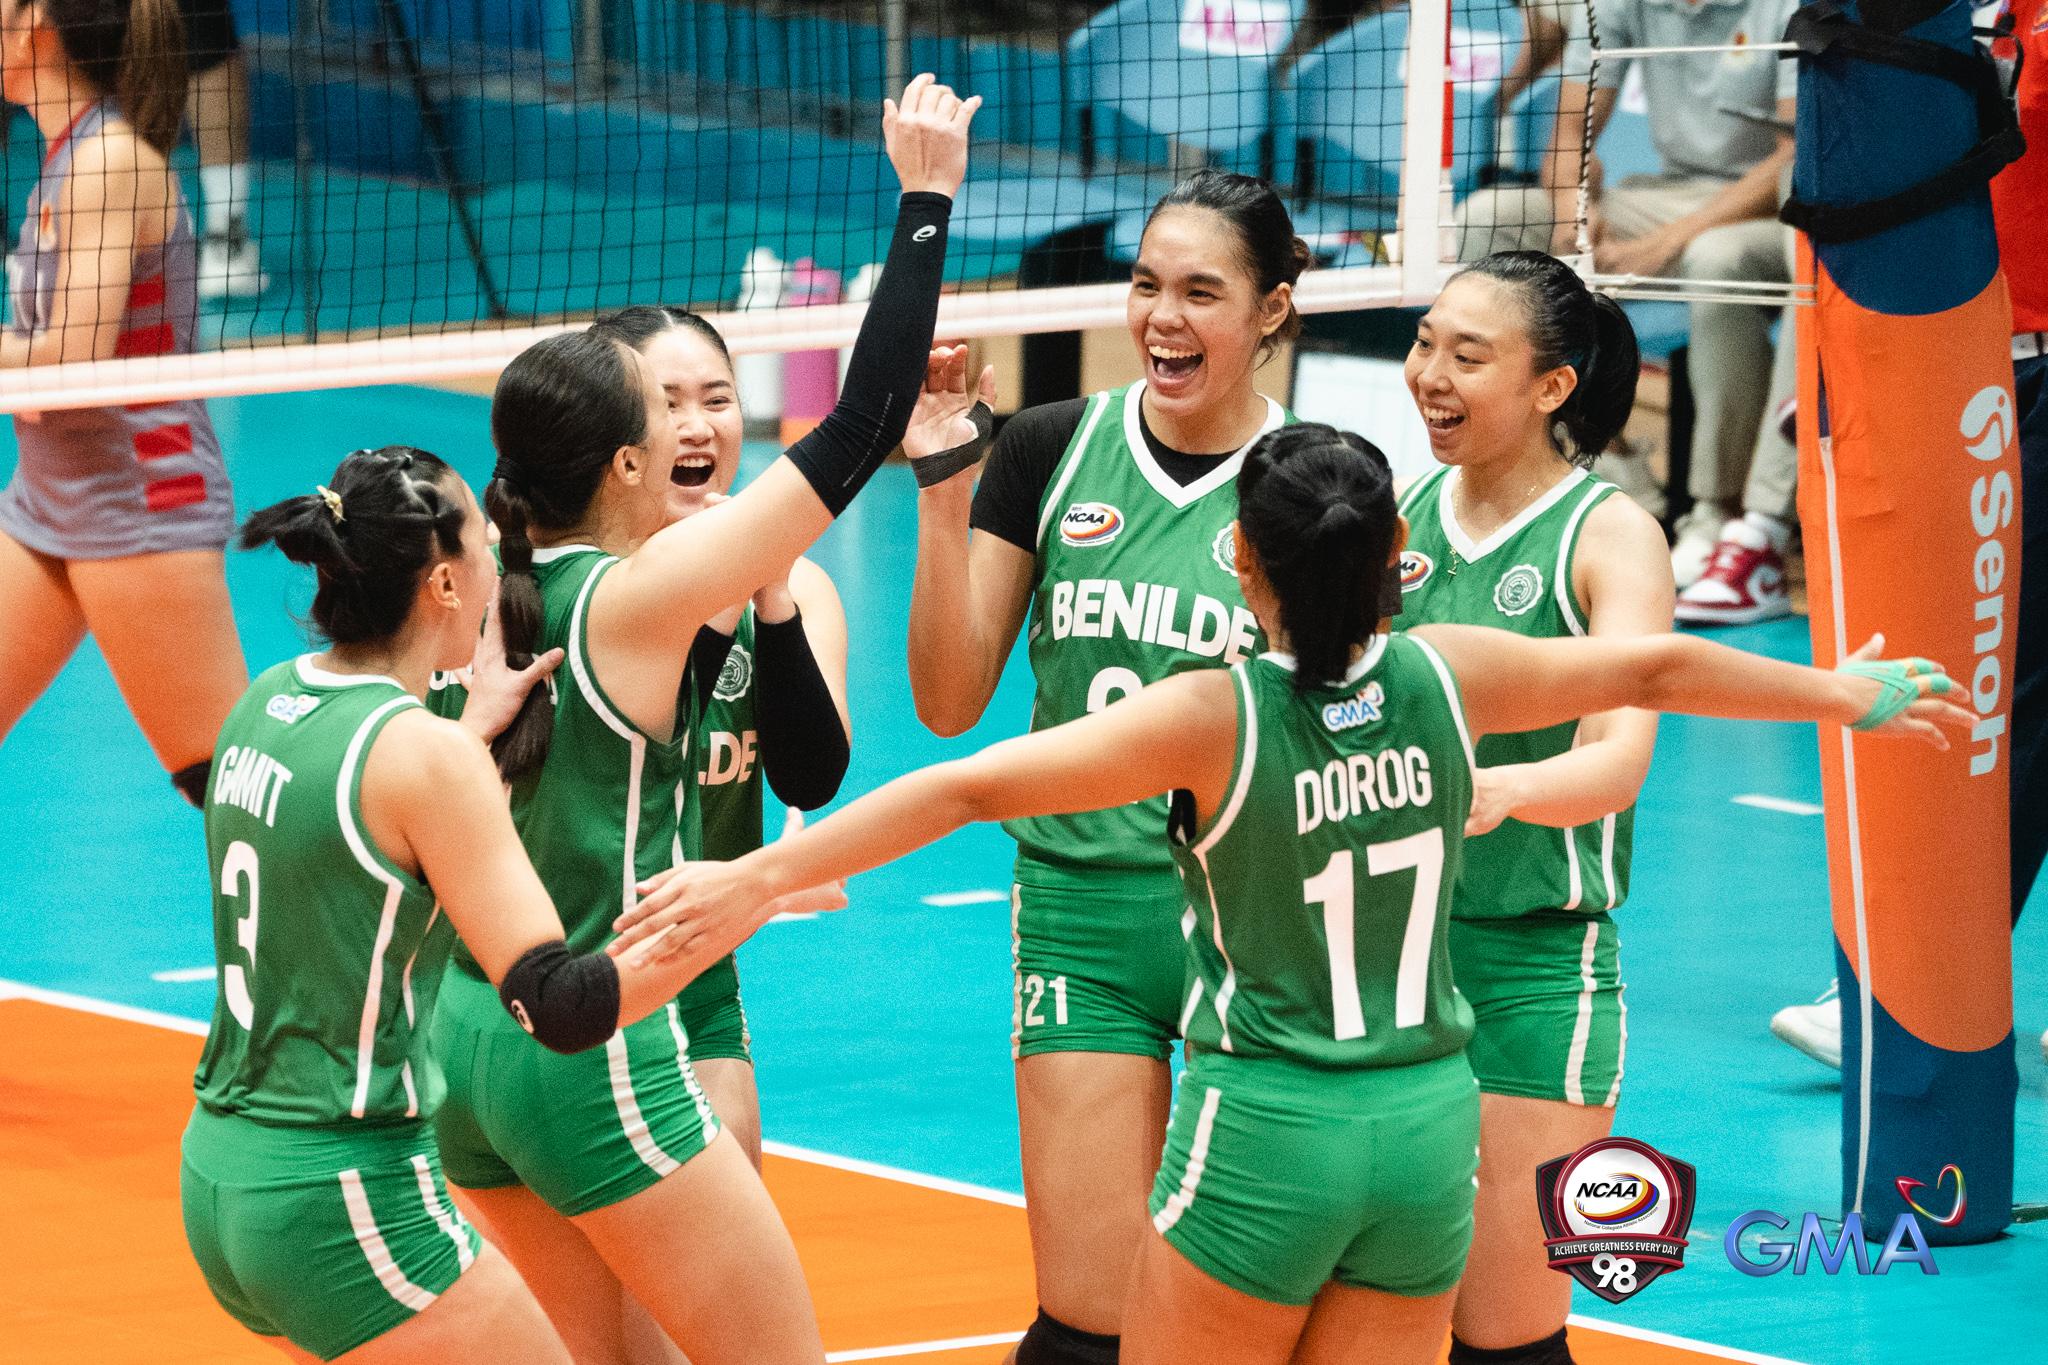 Benilde trounces Lyceum in Game 2, completes NCAA Season 98 sweep to clinch back-to-back titles NCAA Philippines